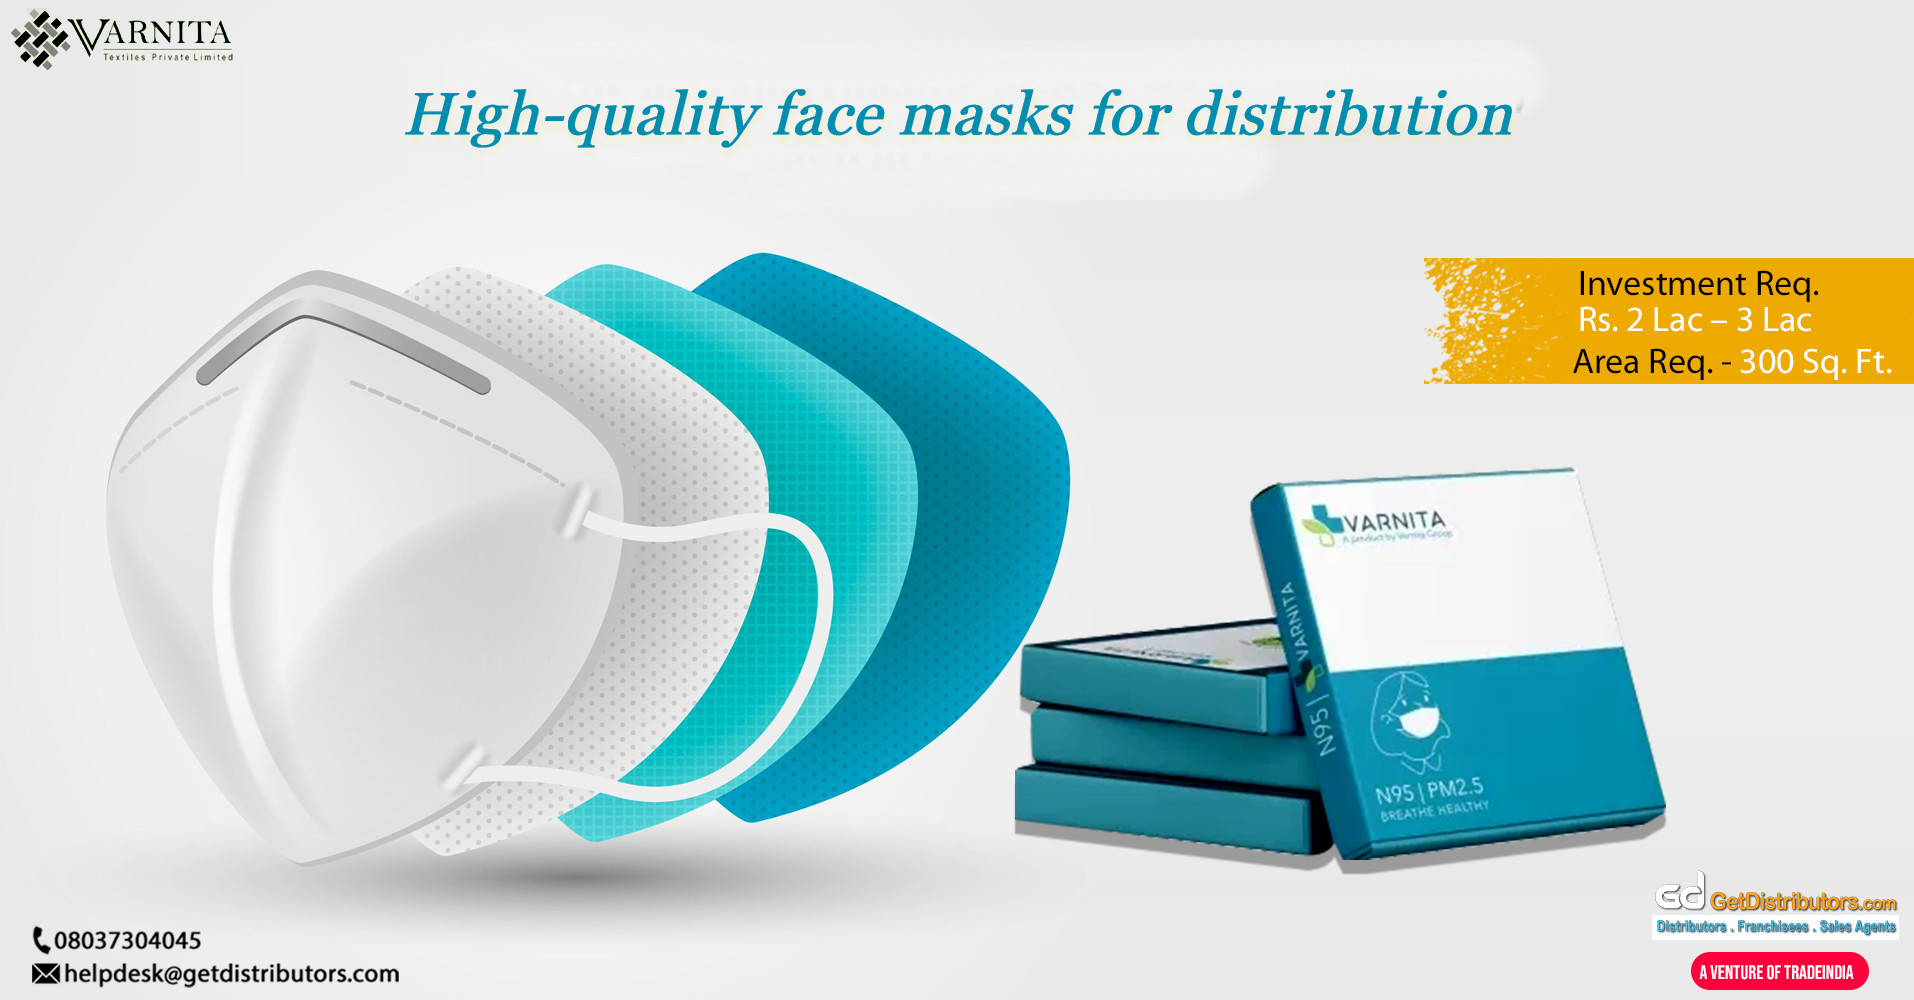 High-quality face masks for distribution